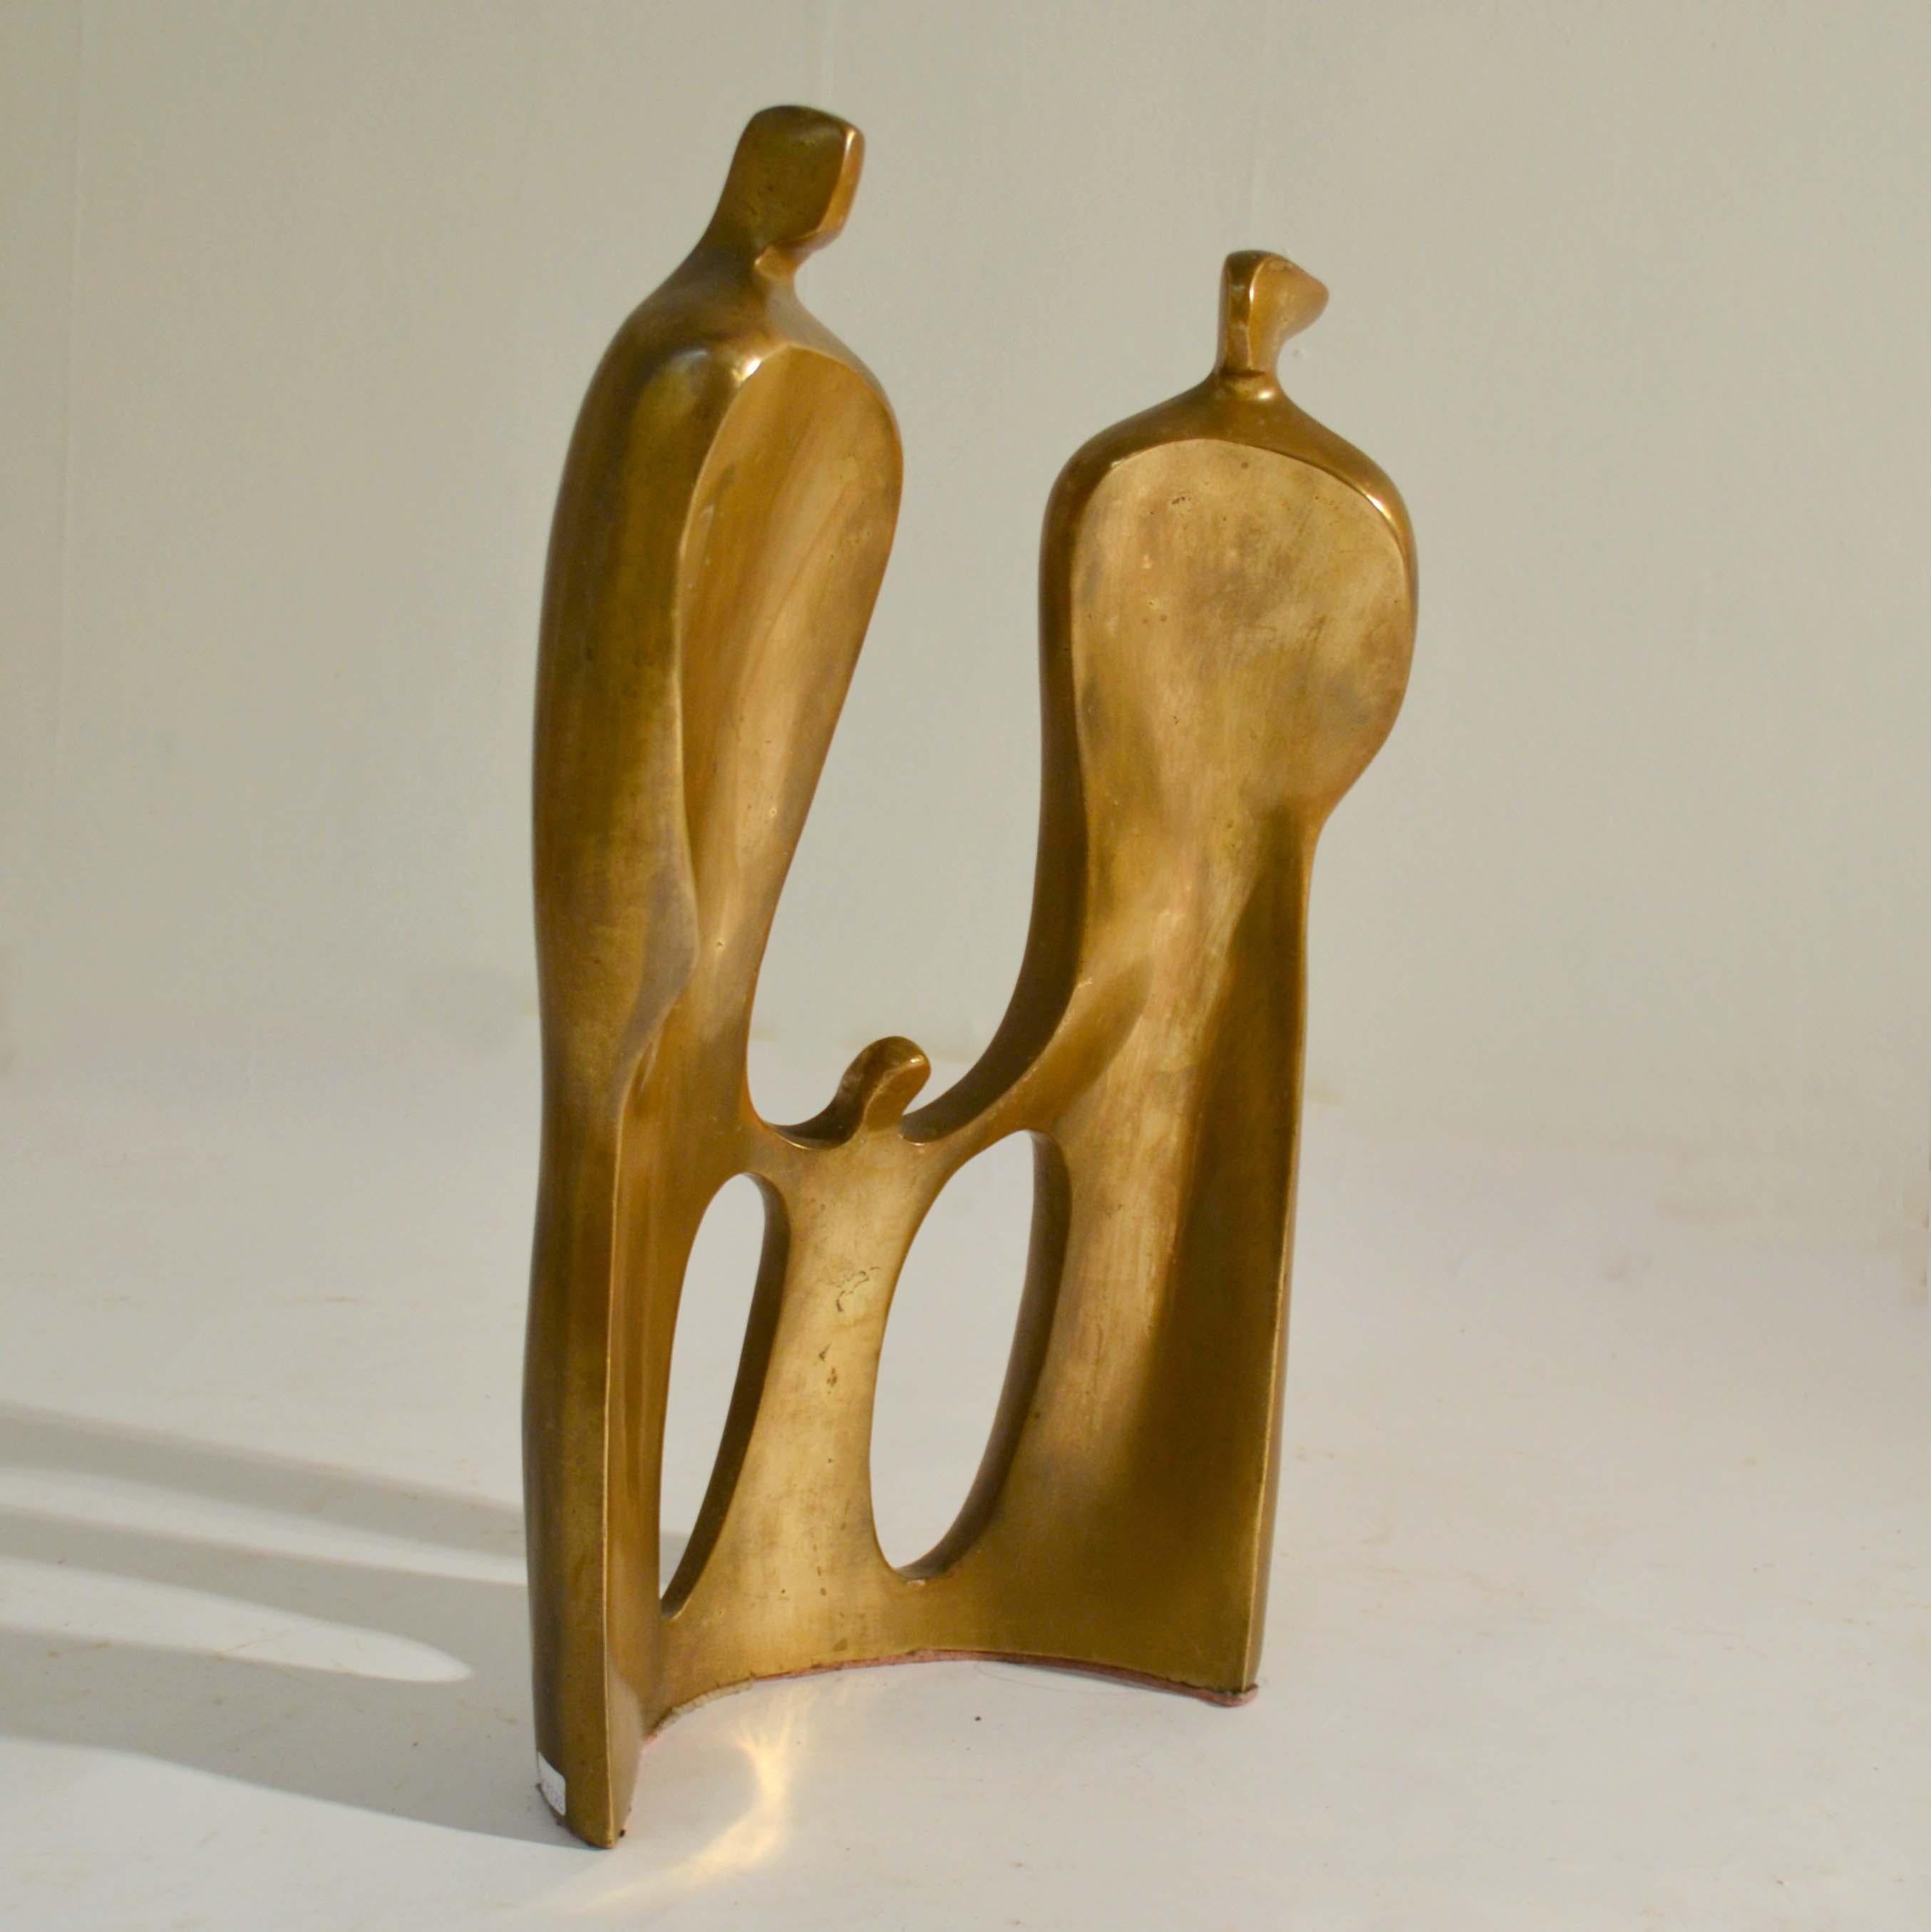 Cast Tall Figurative Bronze Sculpture of Family by Maria Guernova, 1985 For Sale